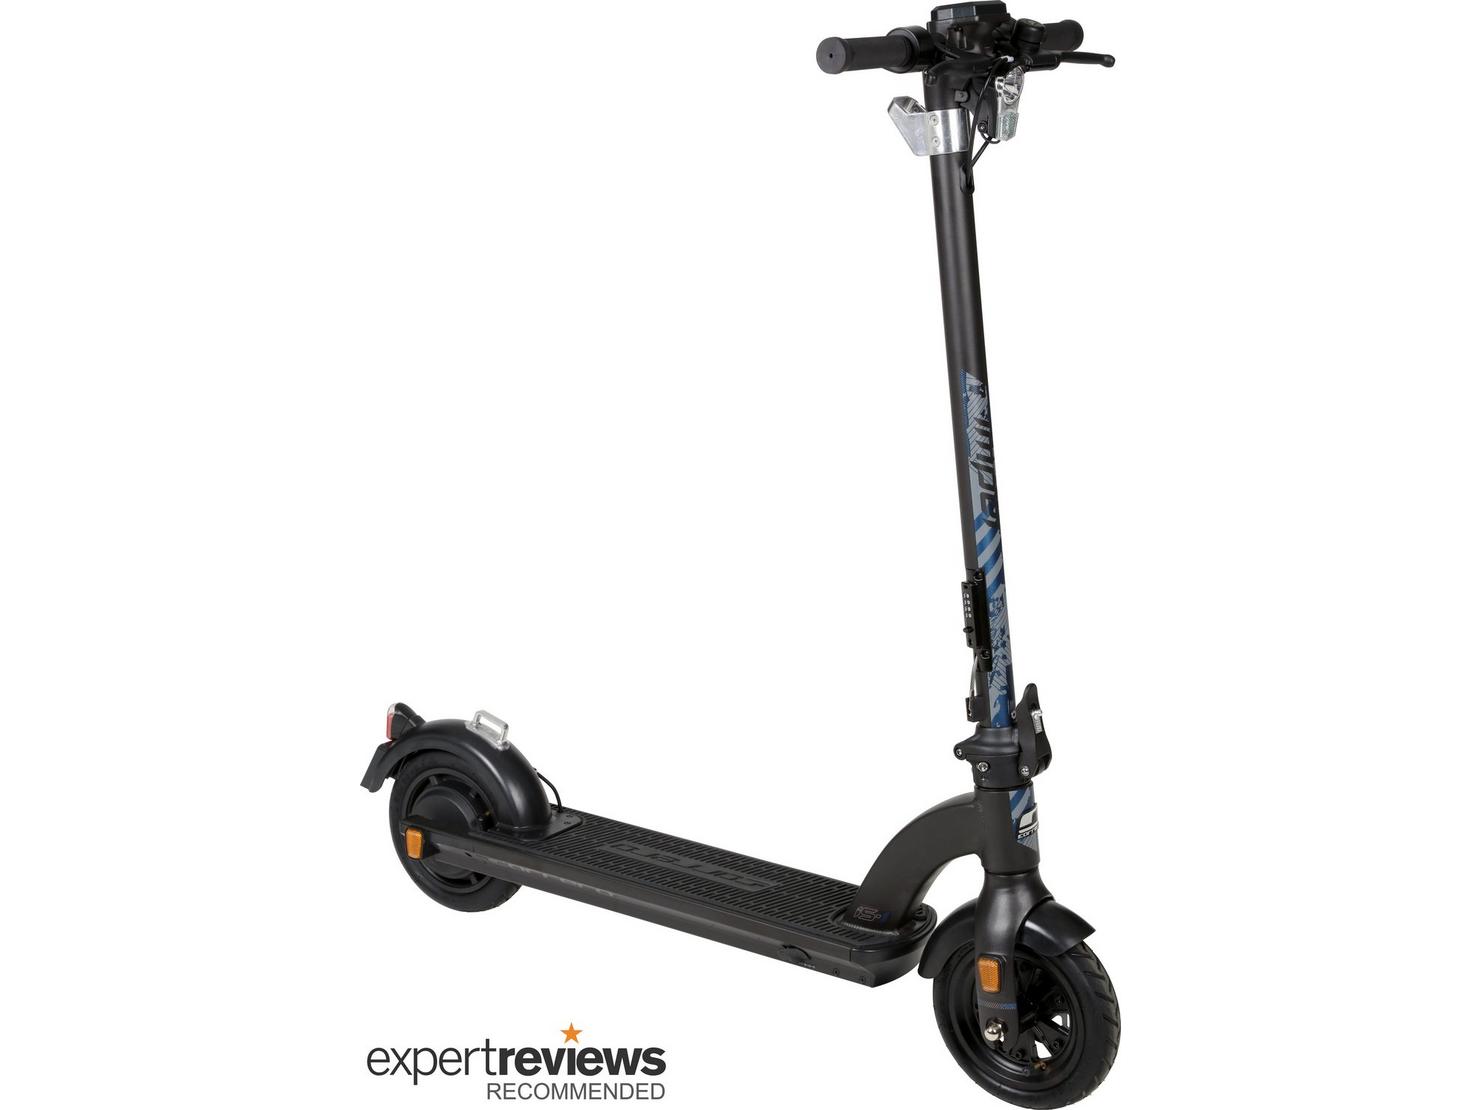 Carrera impel is-1 Electric Scooter